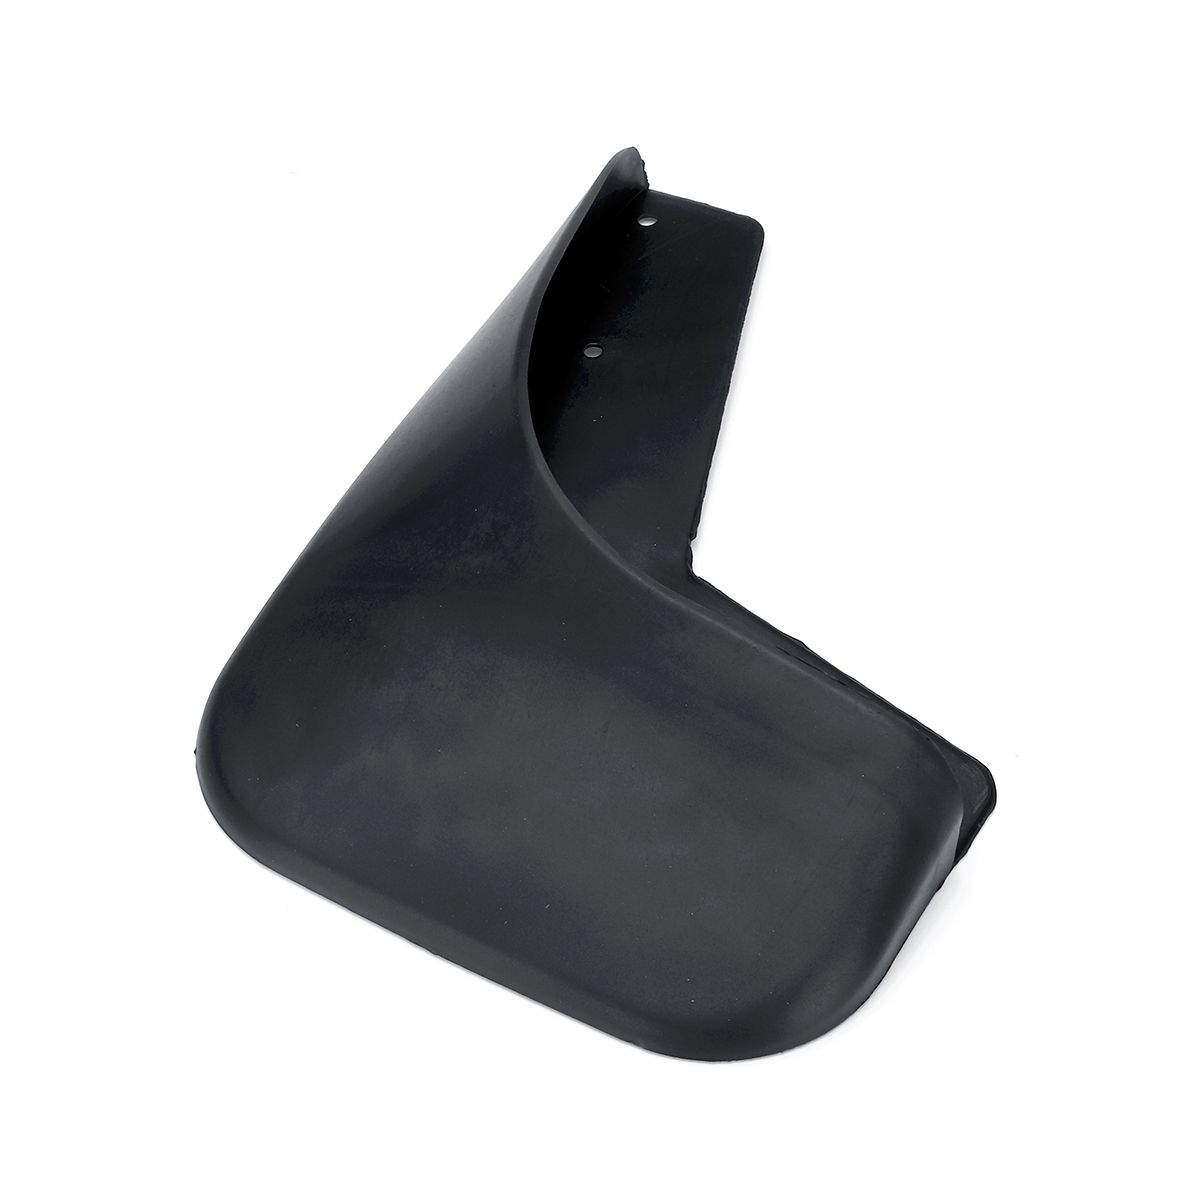 Front-And-Rear-Mud-Flaps-Car-Mudguards-For-Peugeot-307-2000-2007-1406565